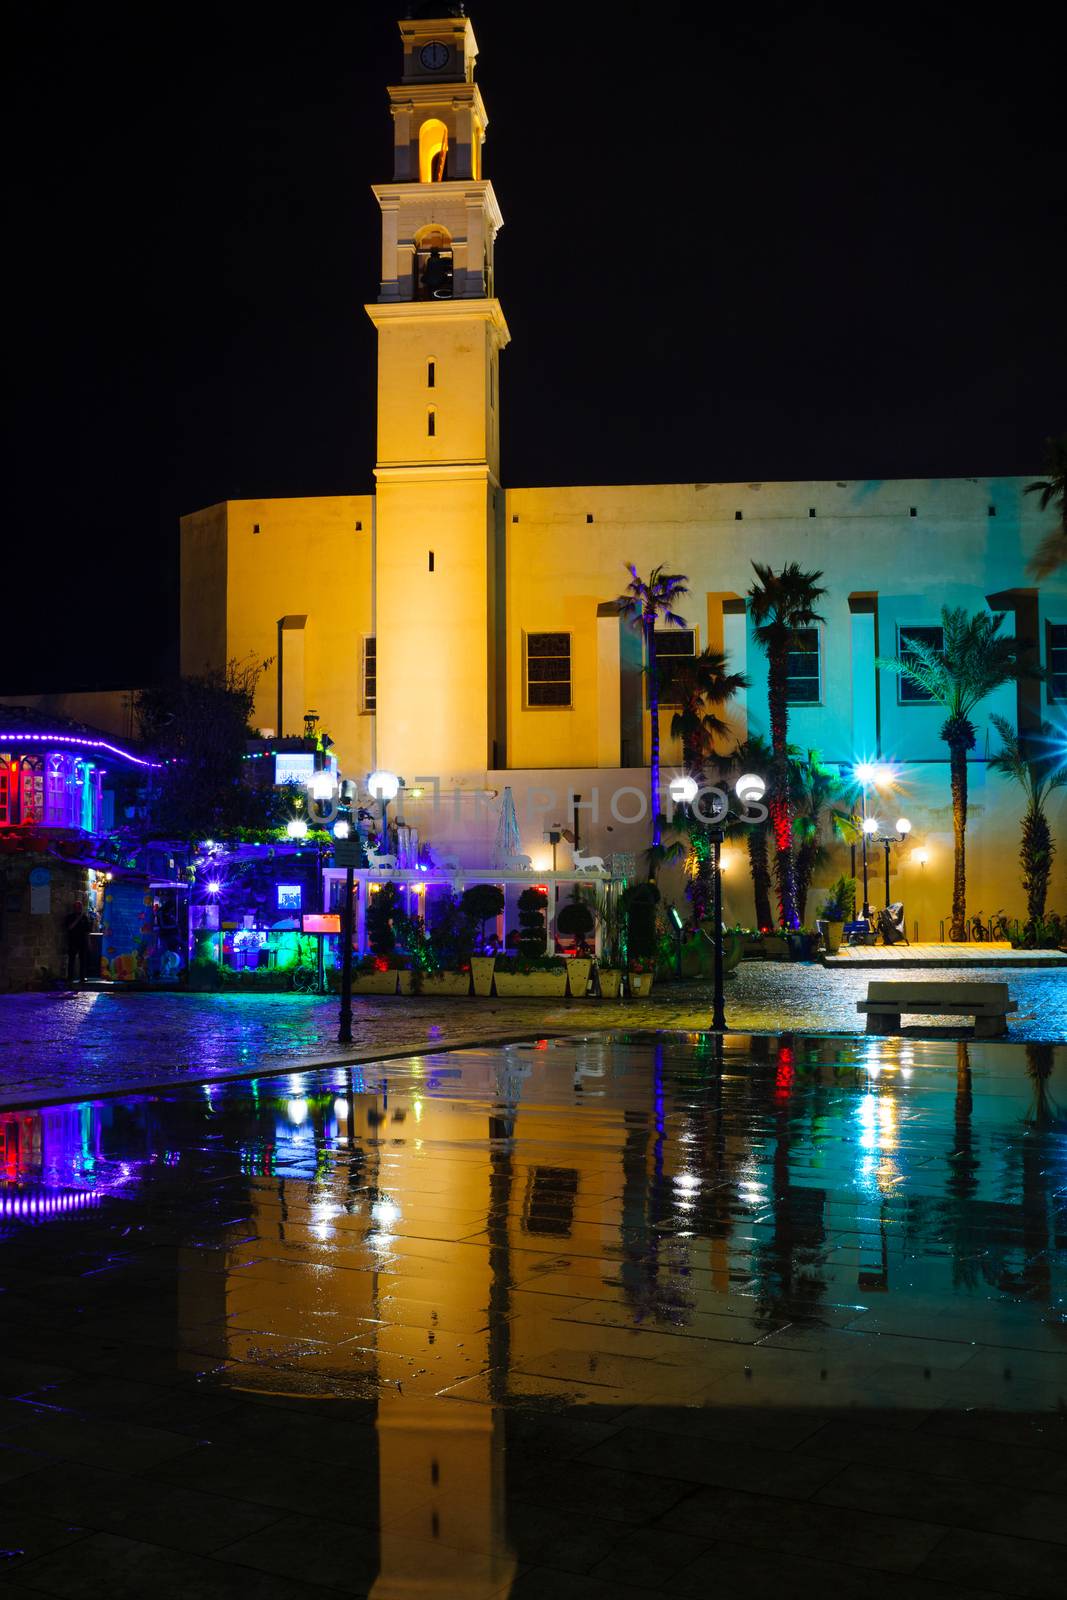 TEL-AVIV, ISRAEL - JANUARY 25, 2016: Night view of Kedumim square and the St. Peter Church, in the old city of Jaffa, Now part of Tel-Aviv Yafo, Israel